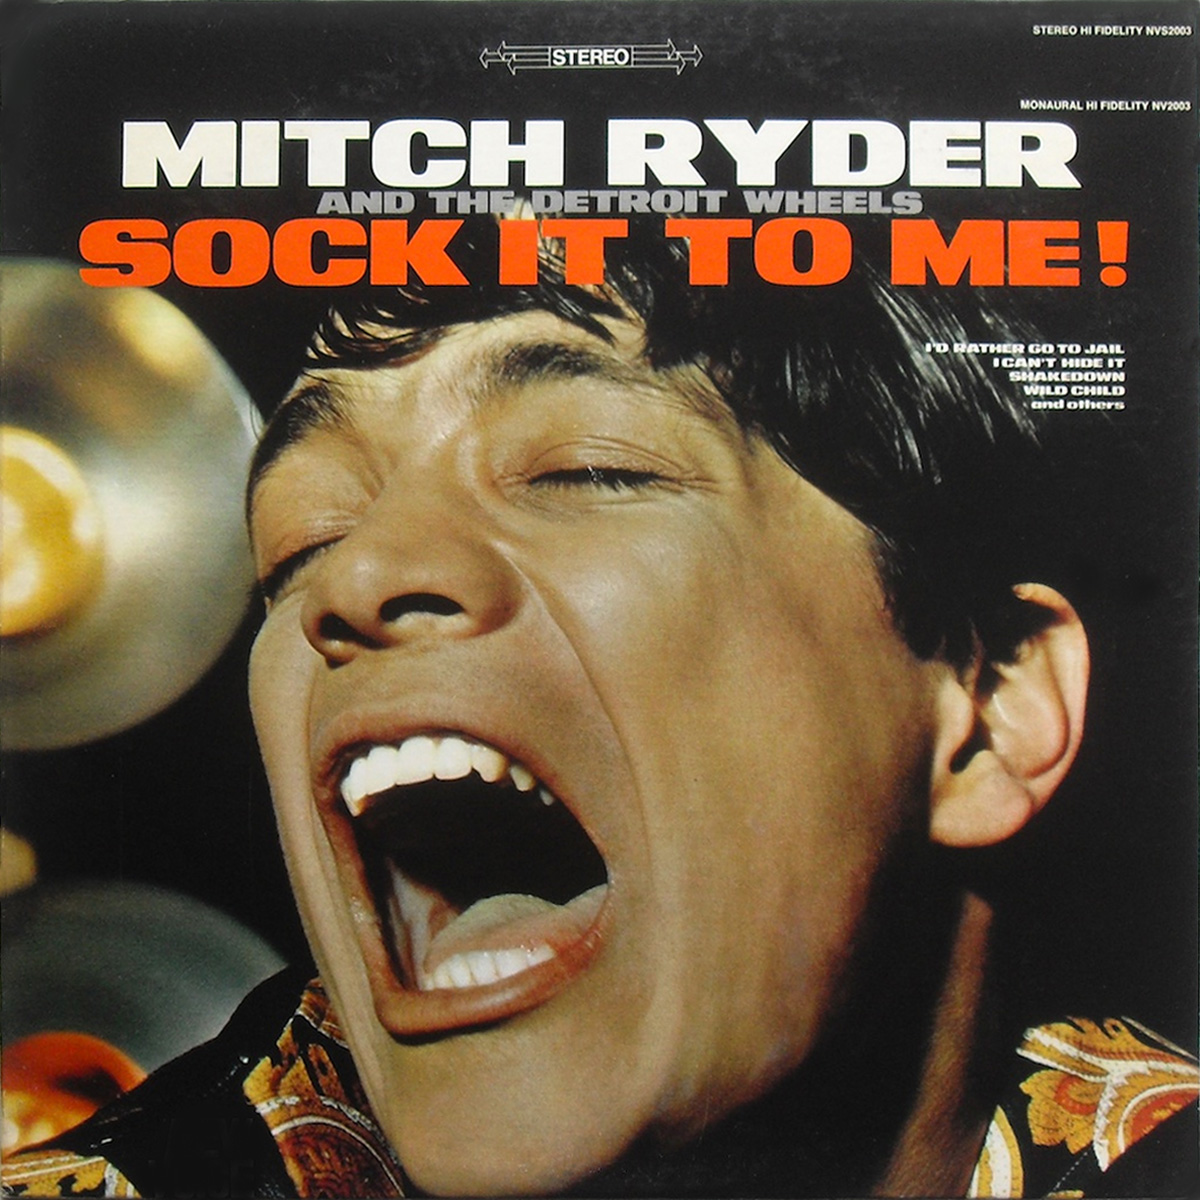 Mitch Ryder and teh Detroit Wheels Sock It To Me Album Art 1967